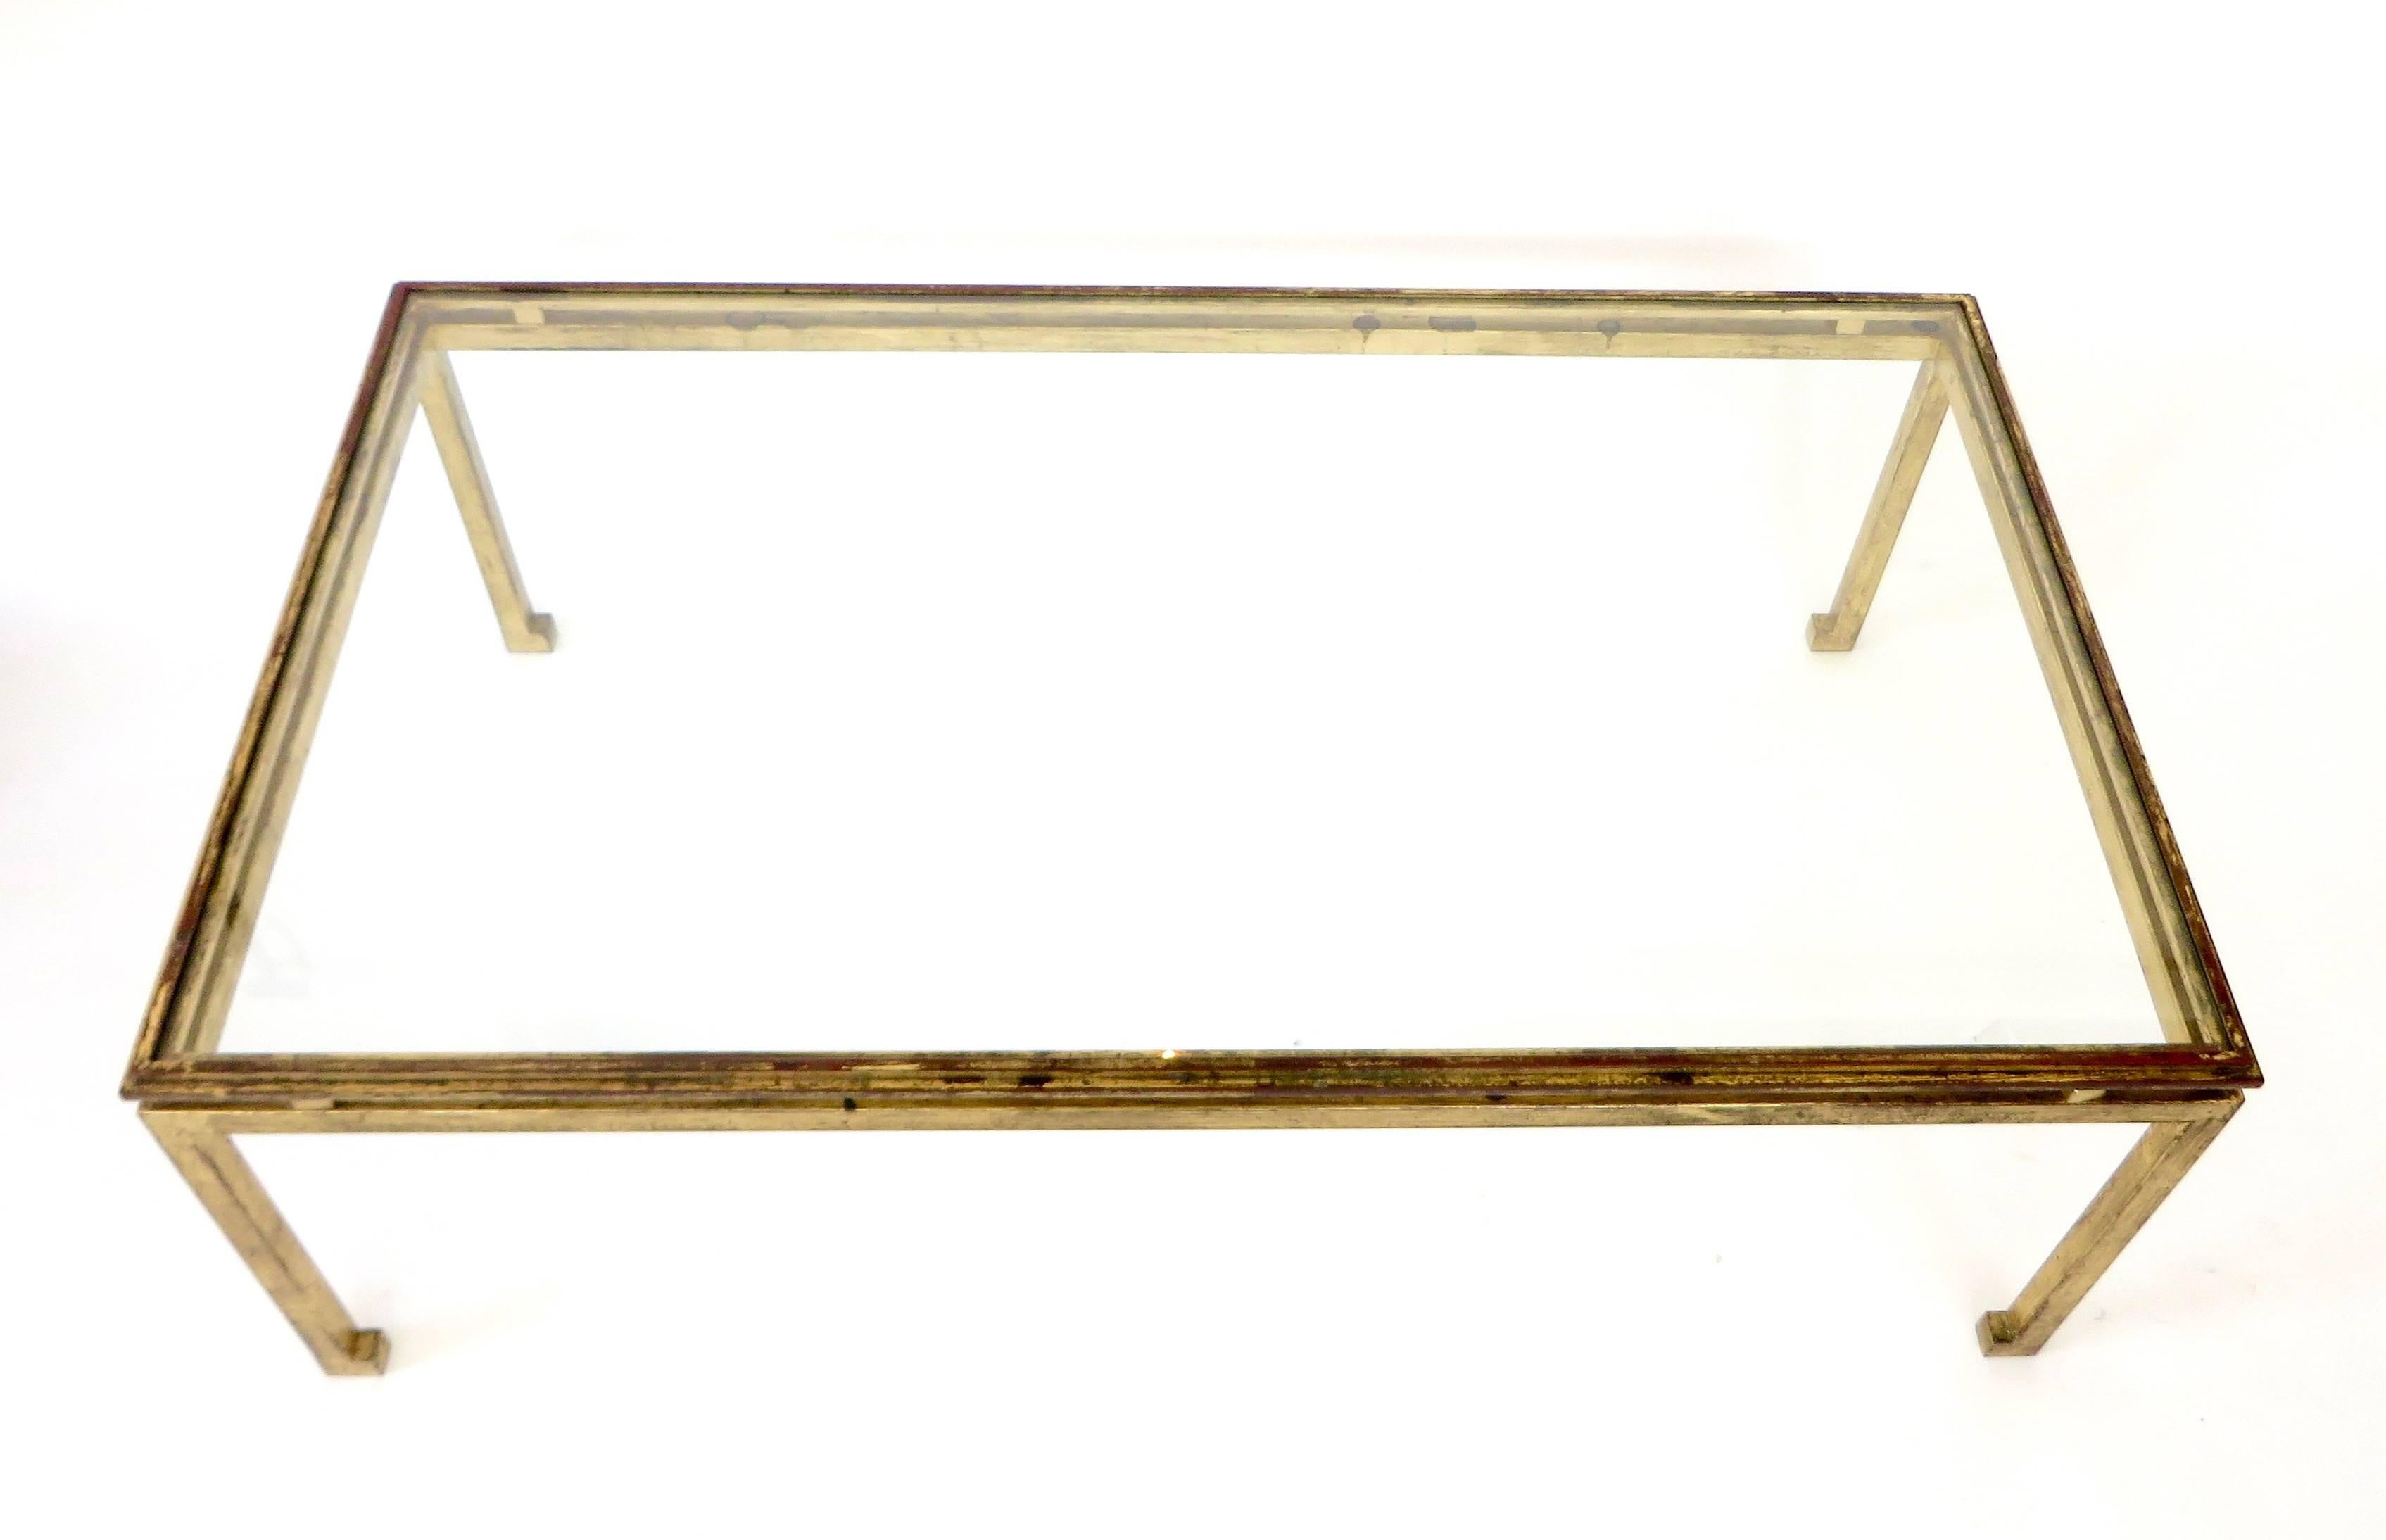 Late 20th Century French Maison Ramsay Gilded Iron and St. Gobain Glass Plateau Coffee Table